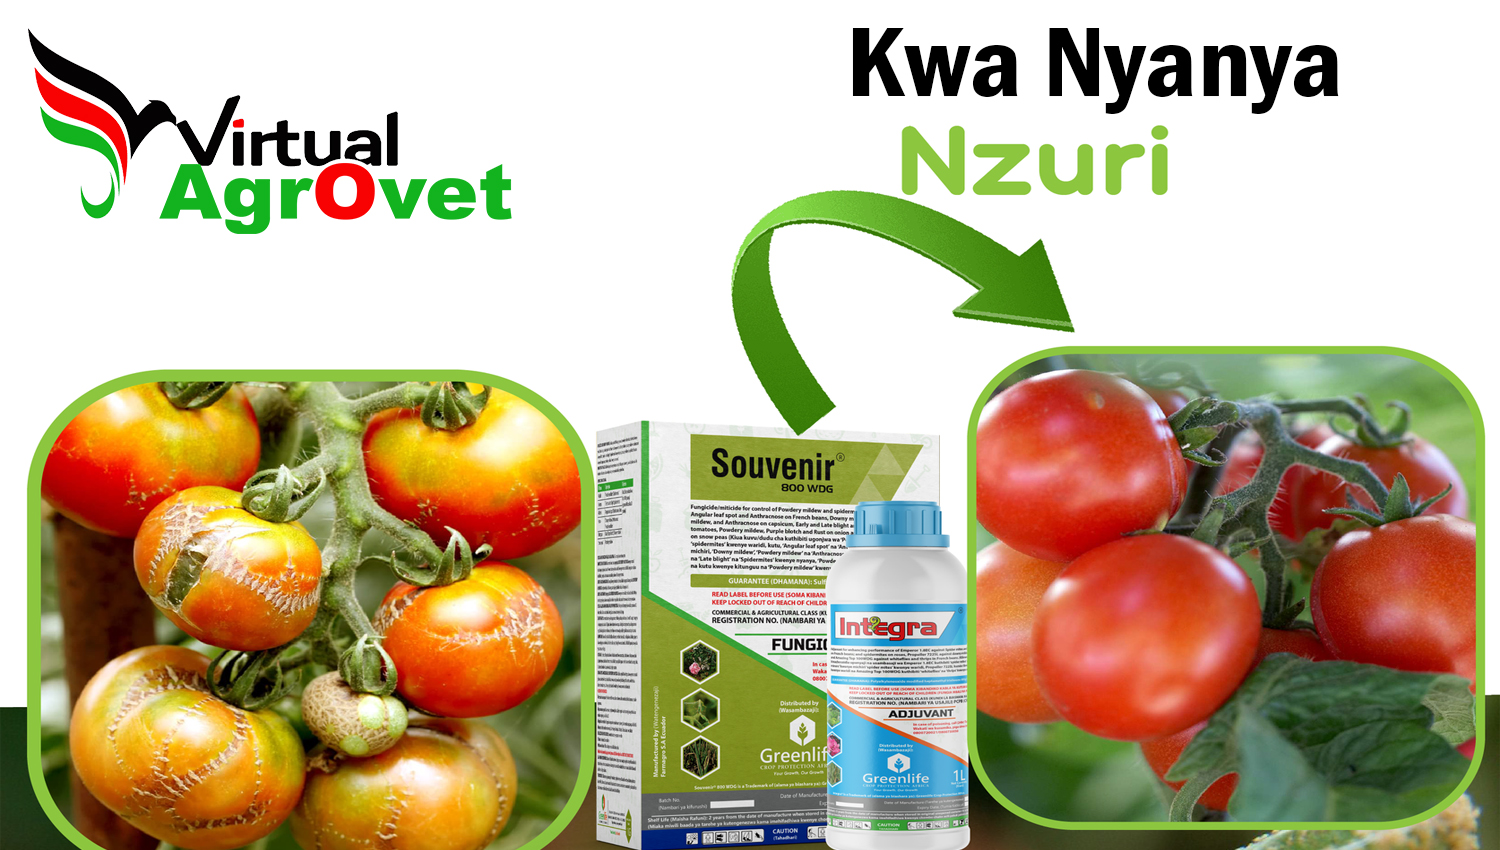 Online Agrovet In Kenya, Virtual Agrovet Changing The Way Farmers and Vendors Conduct Business